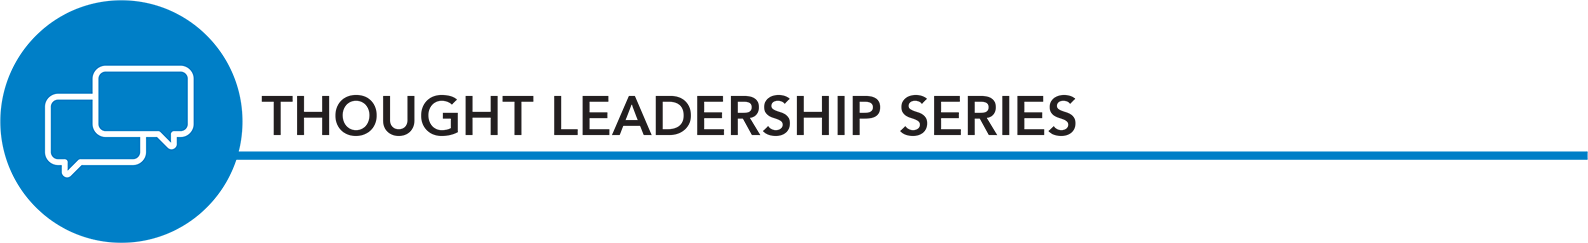 Thought Leadership Series